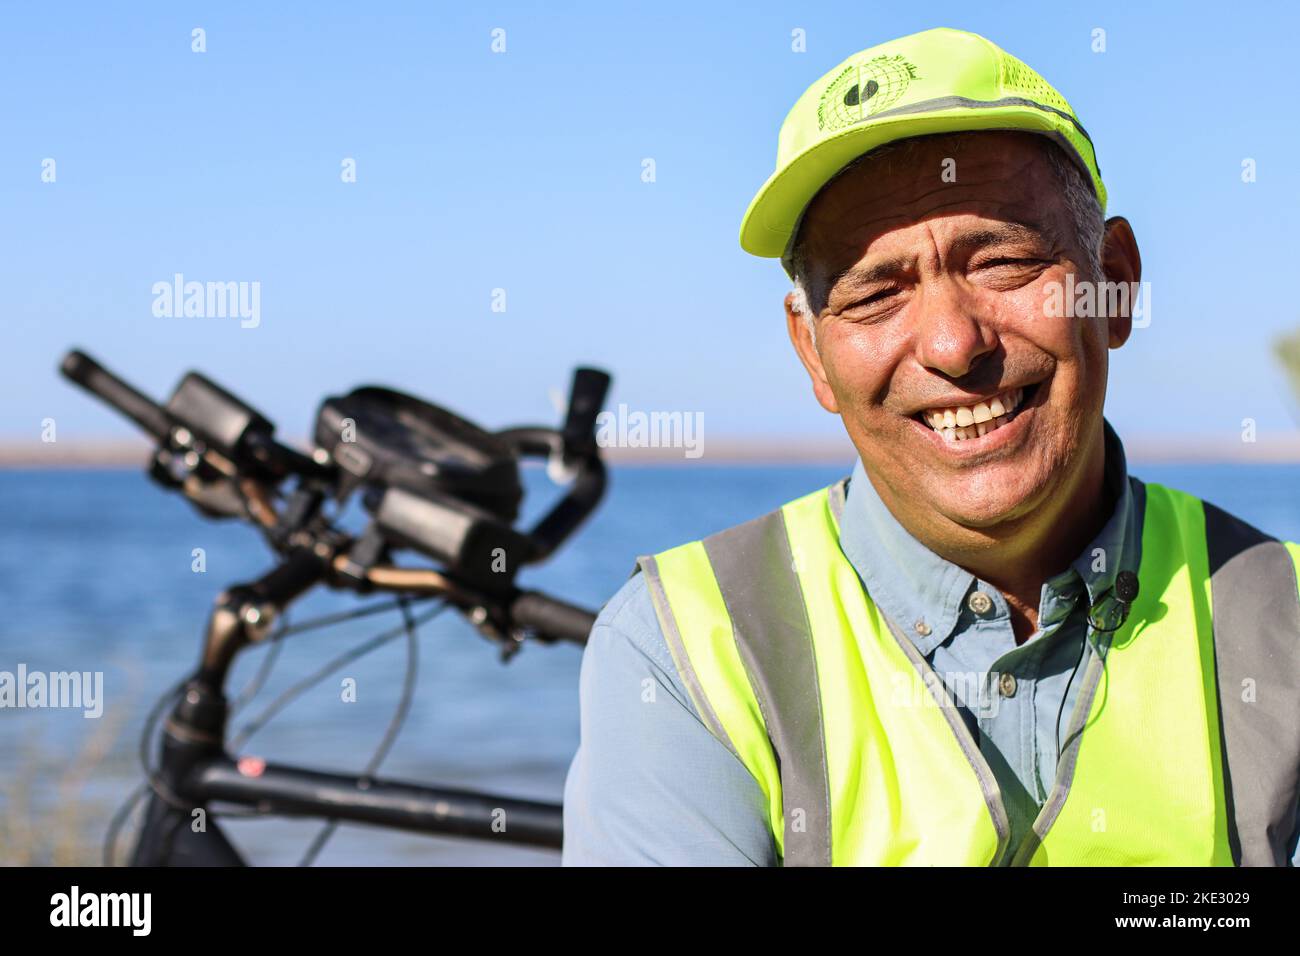 An environmental activist seen during a press interview about his voluntary campaign to clean beaches. Libyan Ali Ragaibi, 52, launched an initiative aimed at cleaning up the waste and garbage scattered on the beaches of Libya to maintain the cleanliness of the country's beaches and in the hope of putting an end to pollution. For 13 years, he has been cleaning up the beach, which he calls the Sea and Sun Campaign, at the end of each summer. The campaign has attracted a large number of followers over the years, and many people are coming to the beach from across the country to do their part, an Stock Photo